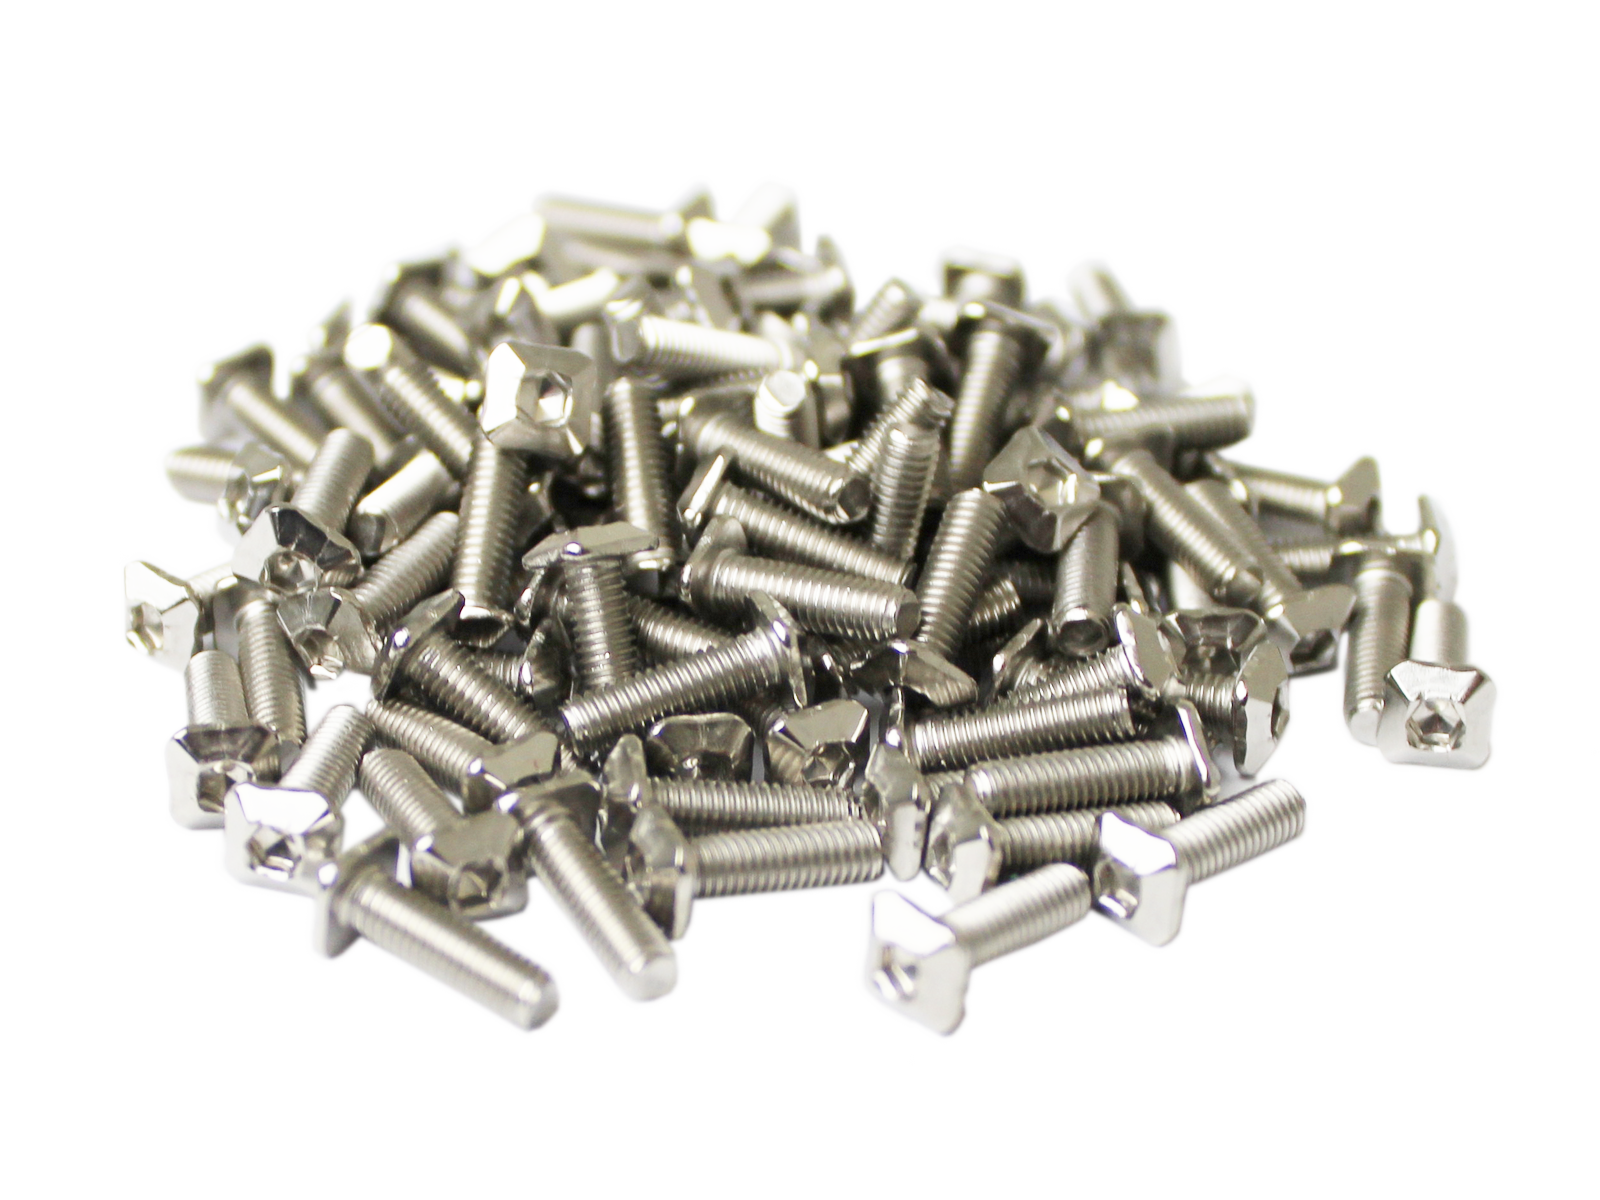 MakerBeam - 10mmx10mm 100 pieces, M3, 10mm, MakerBeam square headed bolts with hex hole